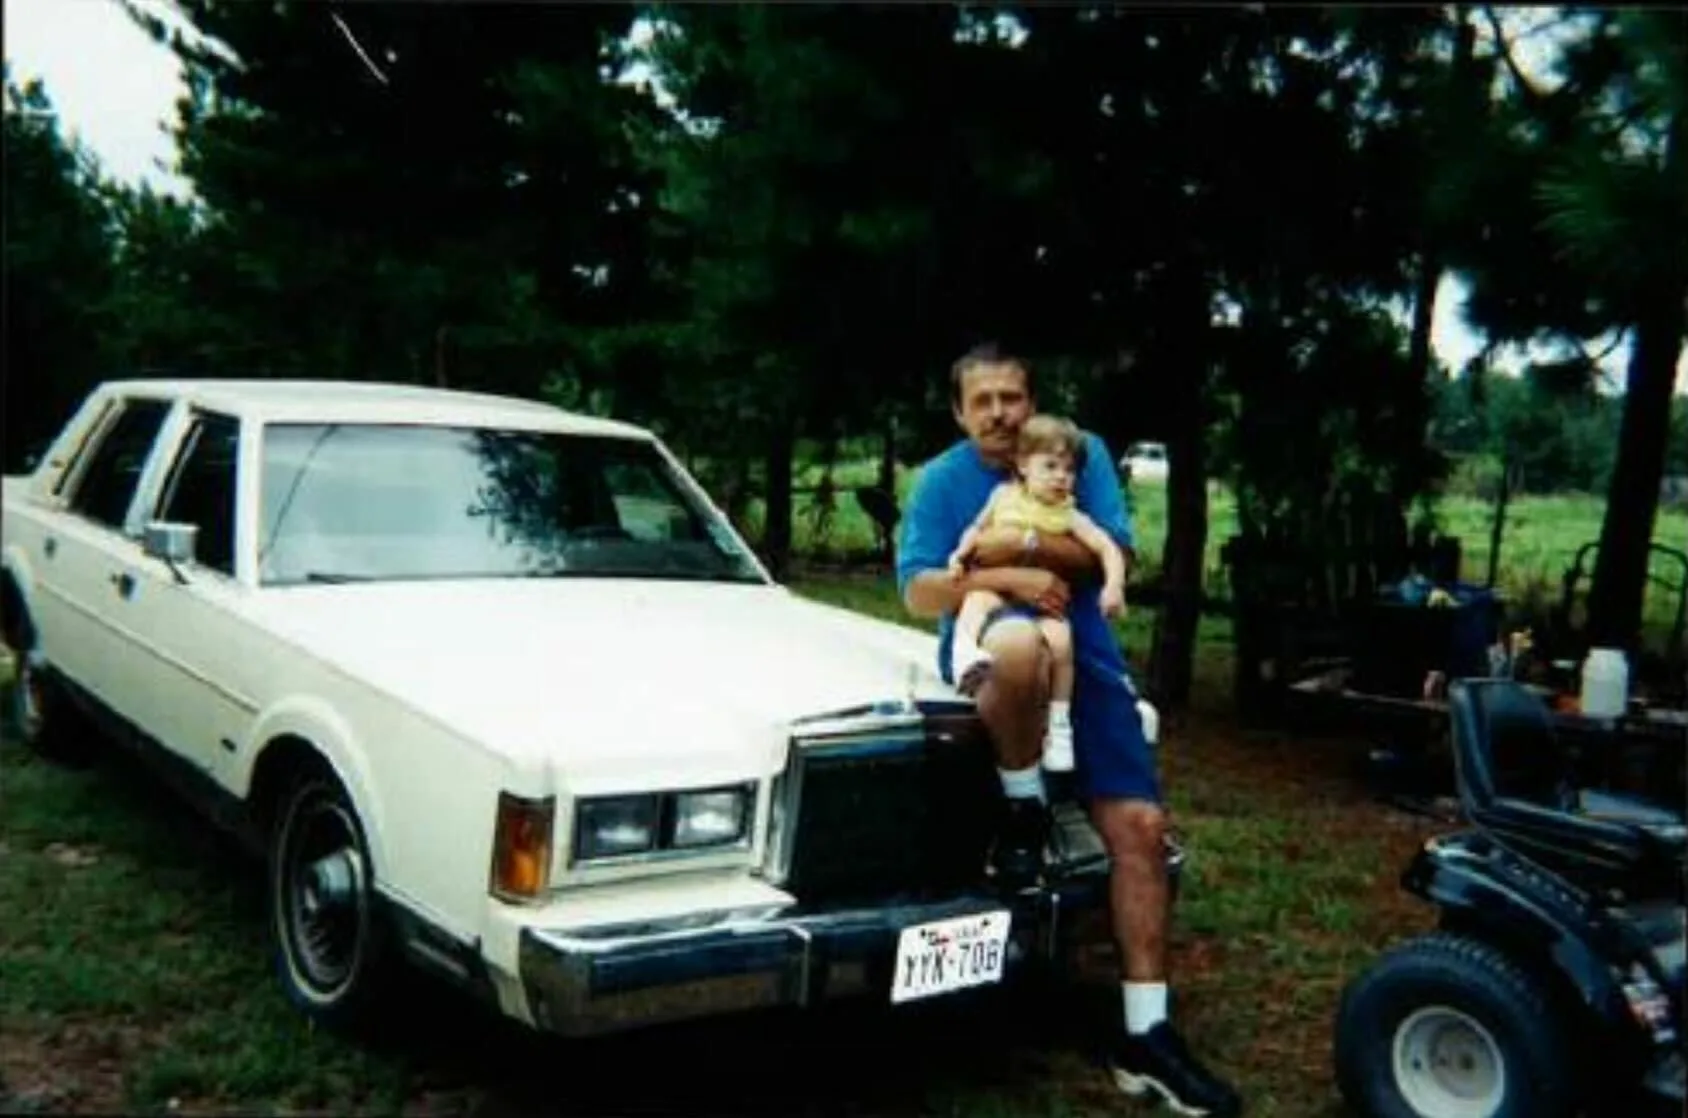 Robert Roberson with his daughter Nikki before she passed away. (Image courtesy of the Roberson family)